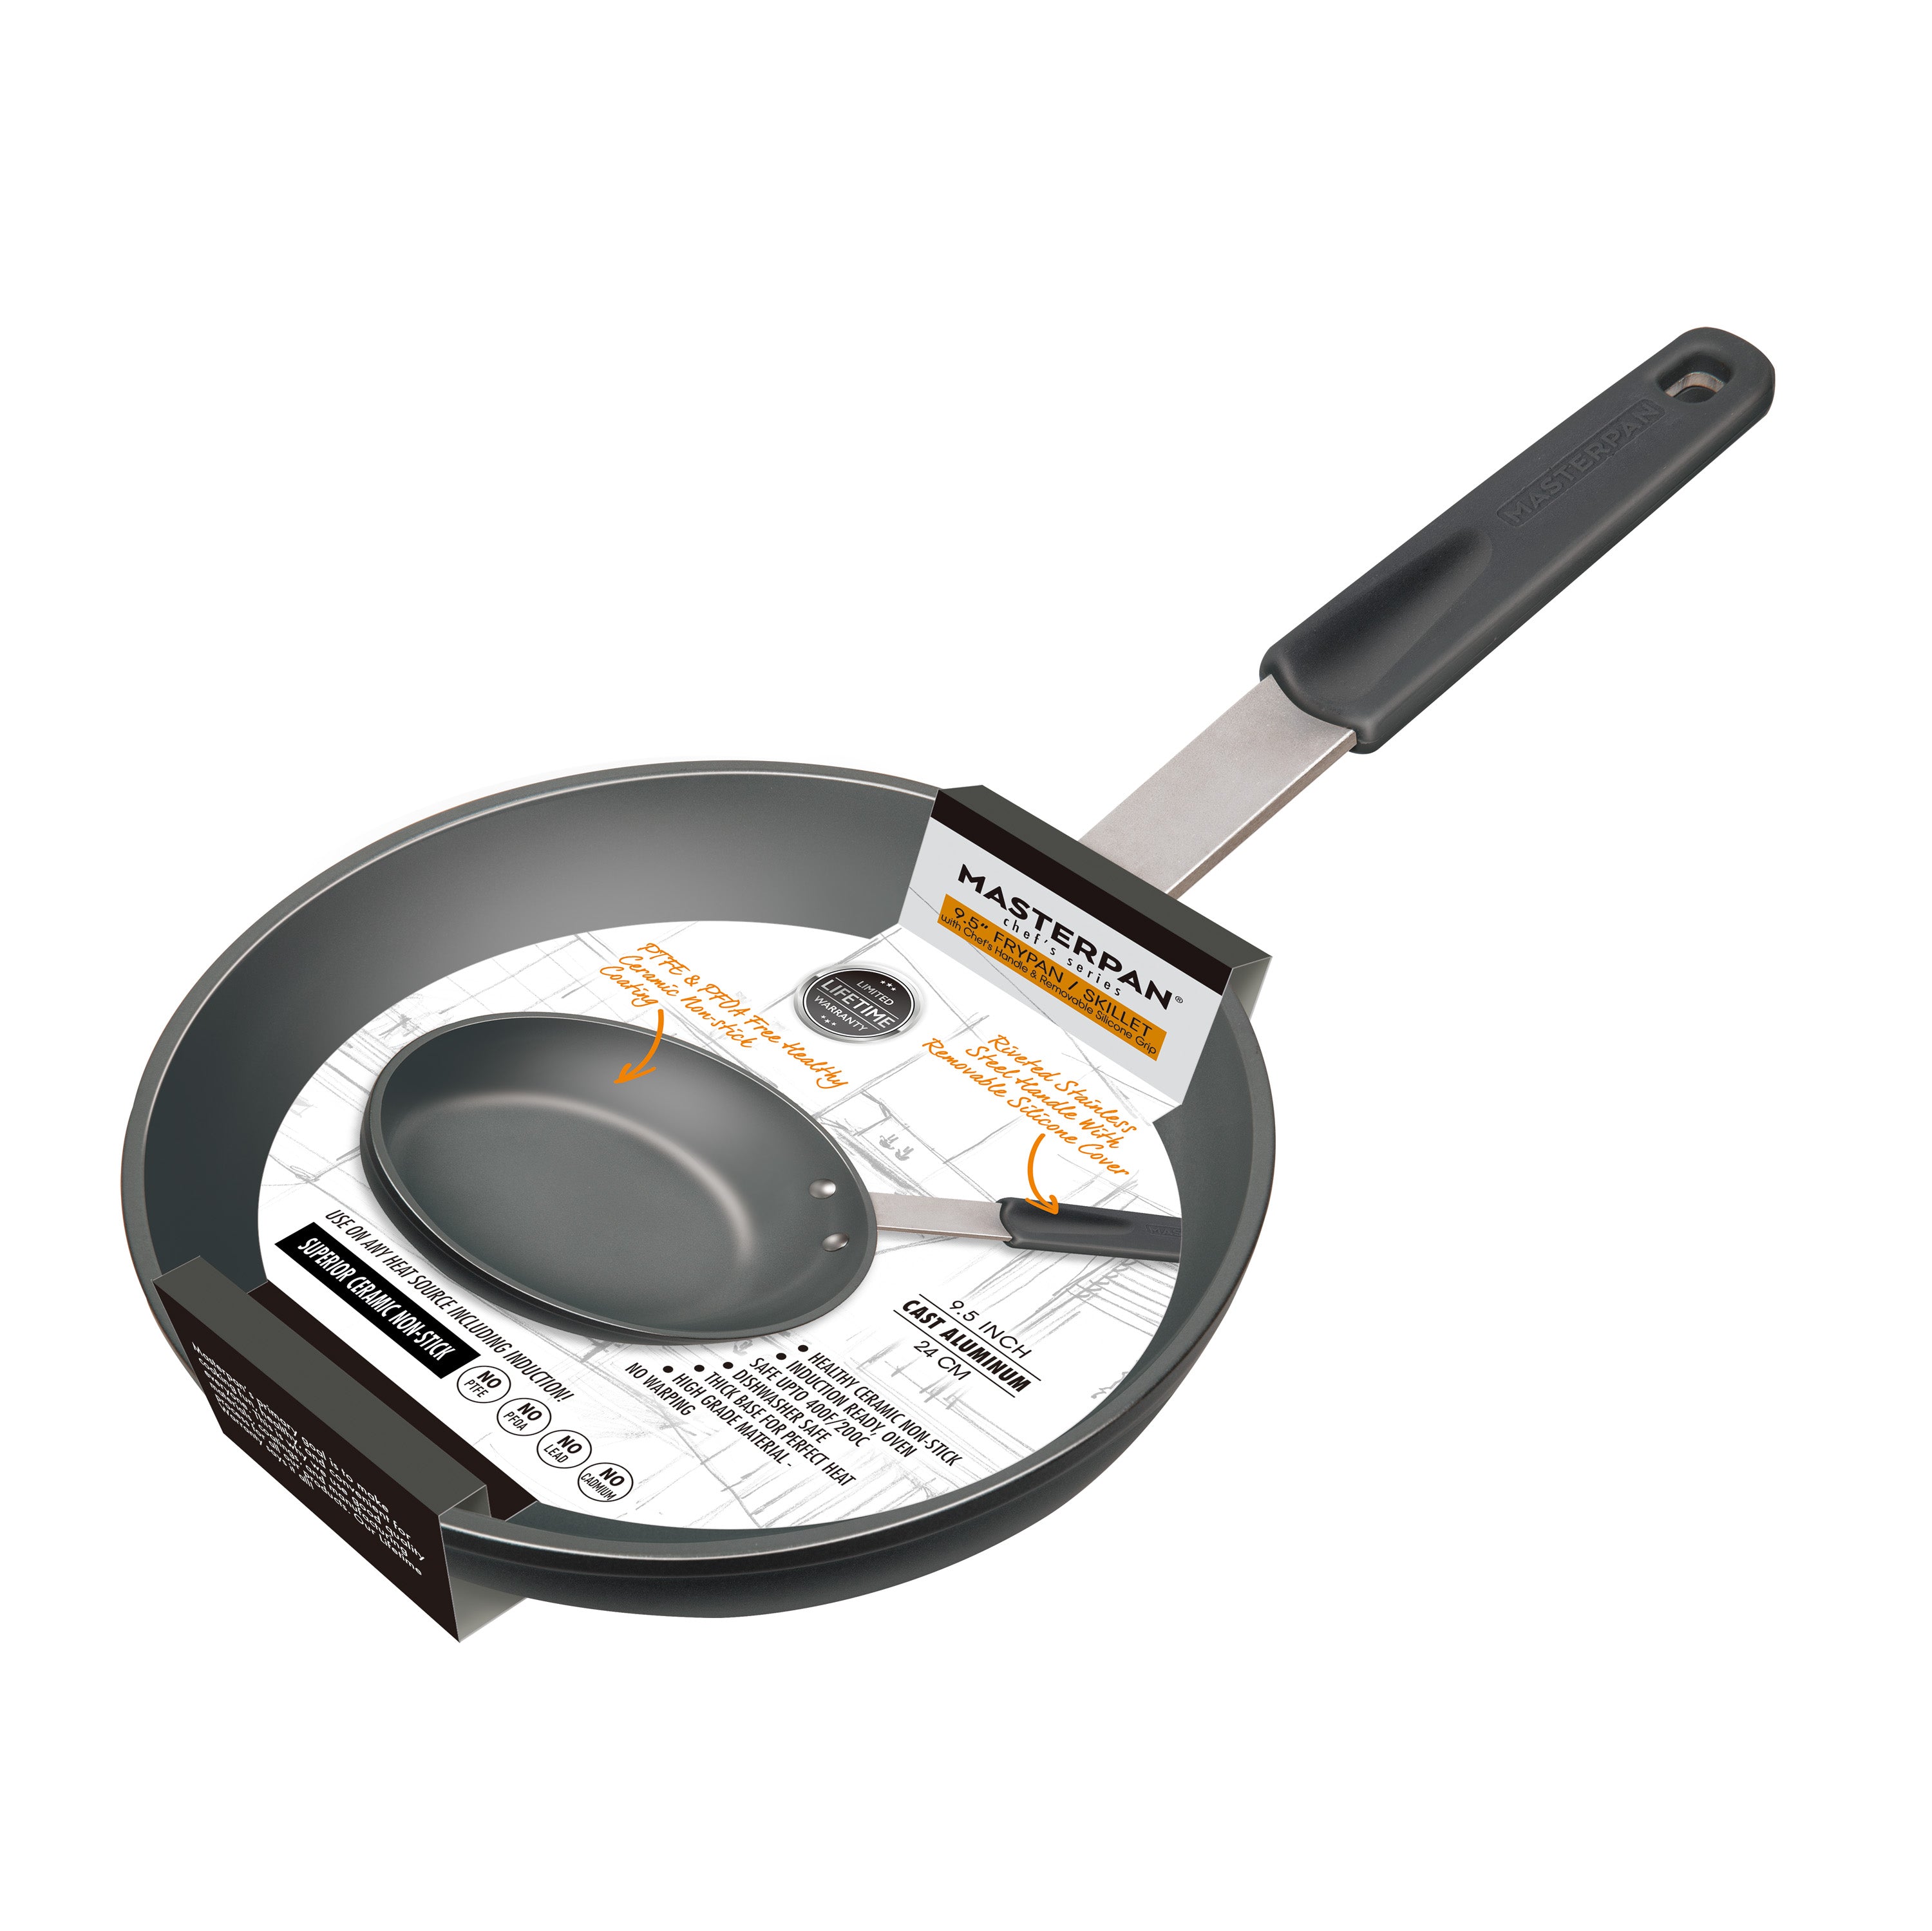 FRY PAN & SKILLET, HEALTHY CERAMIC NON-STICK ALUMINIUM COOKWARE WITH STAINLESS STEEL CHEF’S HANDLE, 9.5” (24cm)